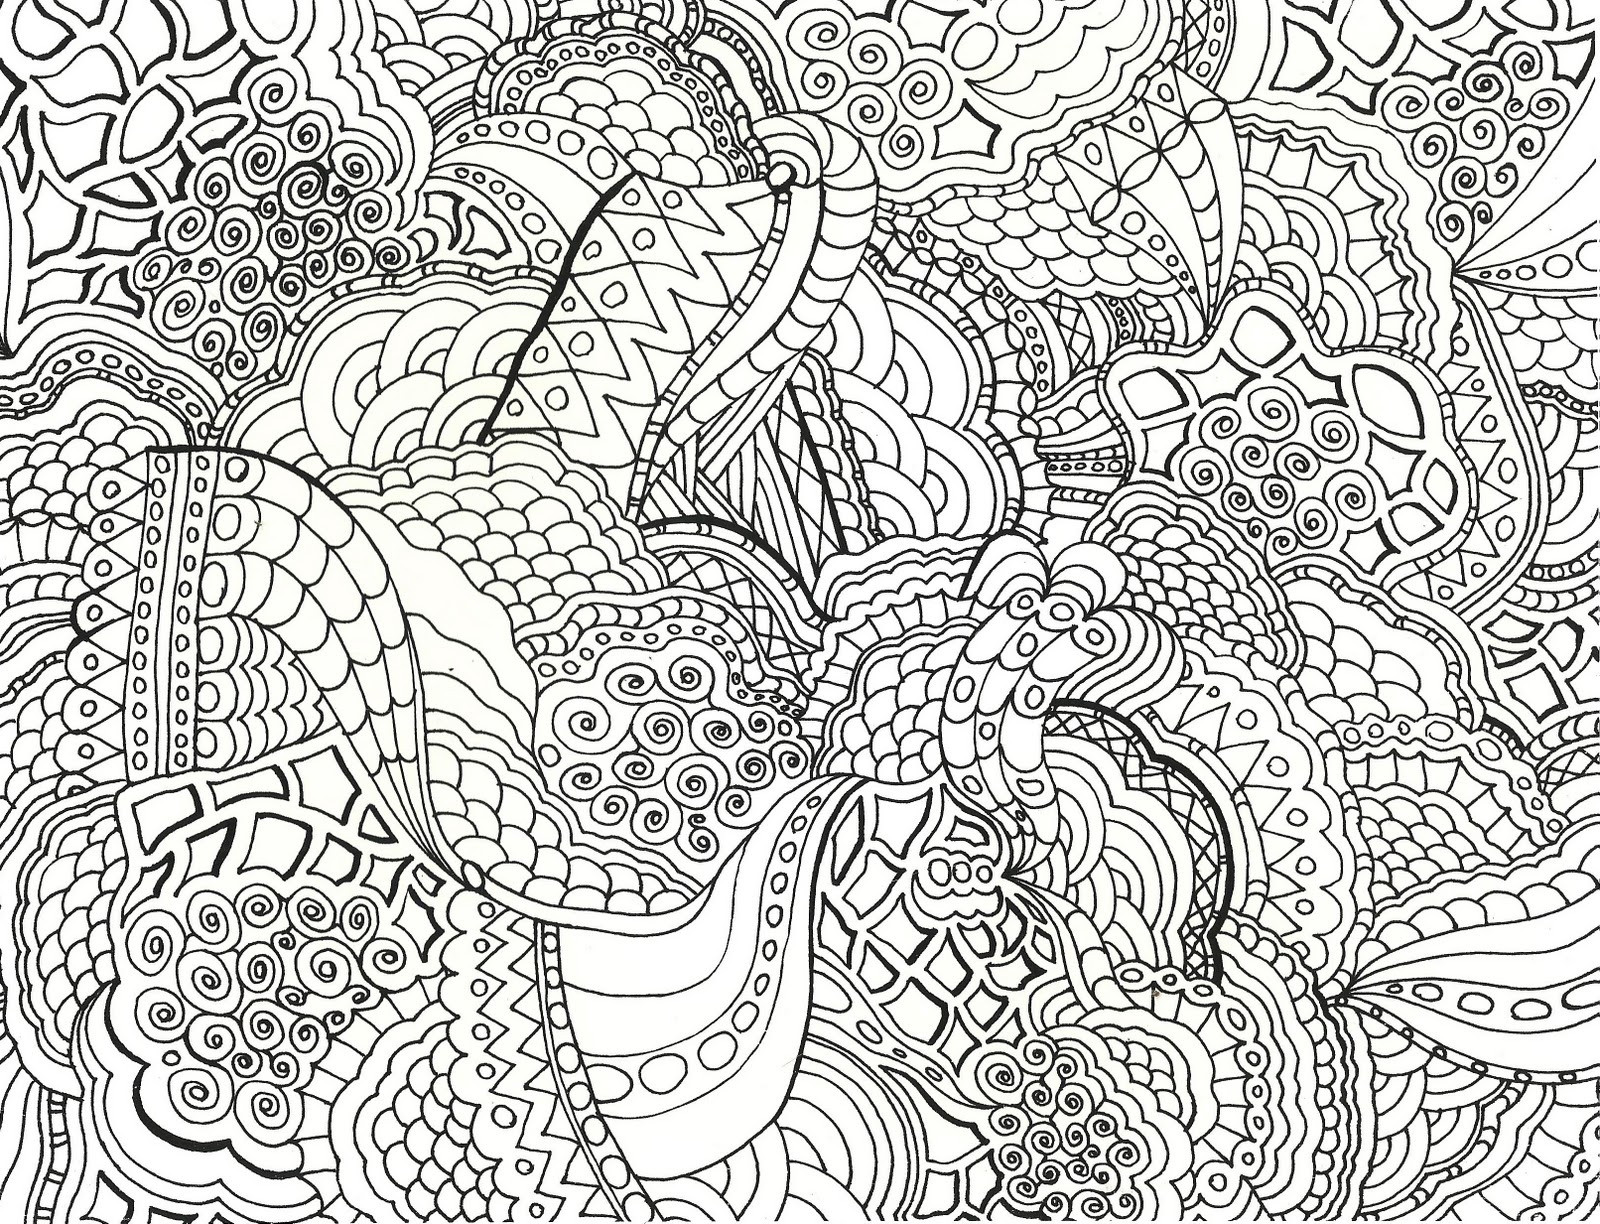 Coloring Pages For Boys Designed
 Coloring Pages for Girls and Boys Unique Surprising Design